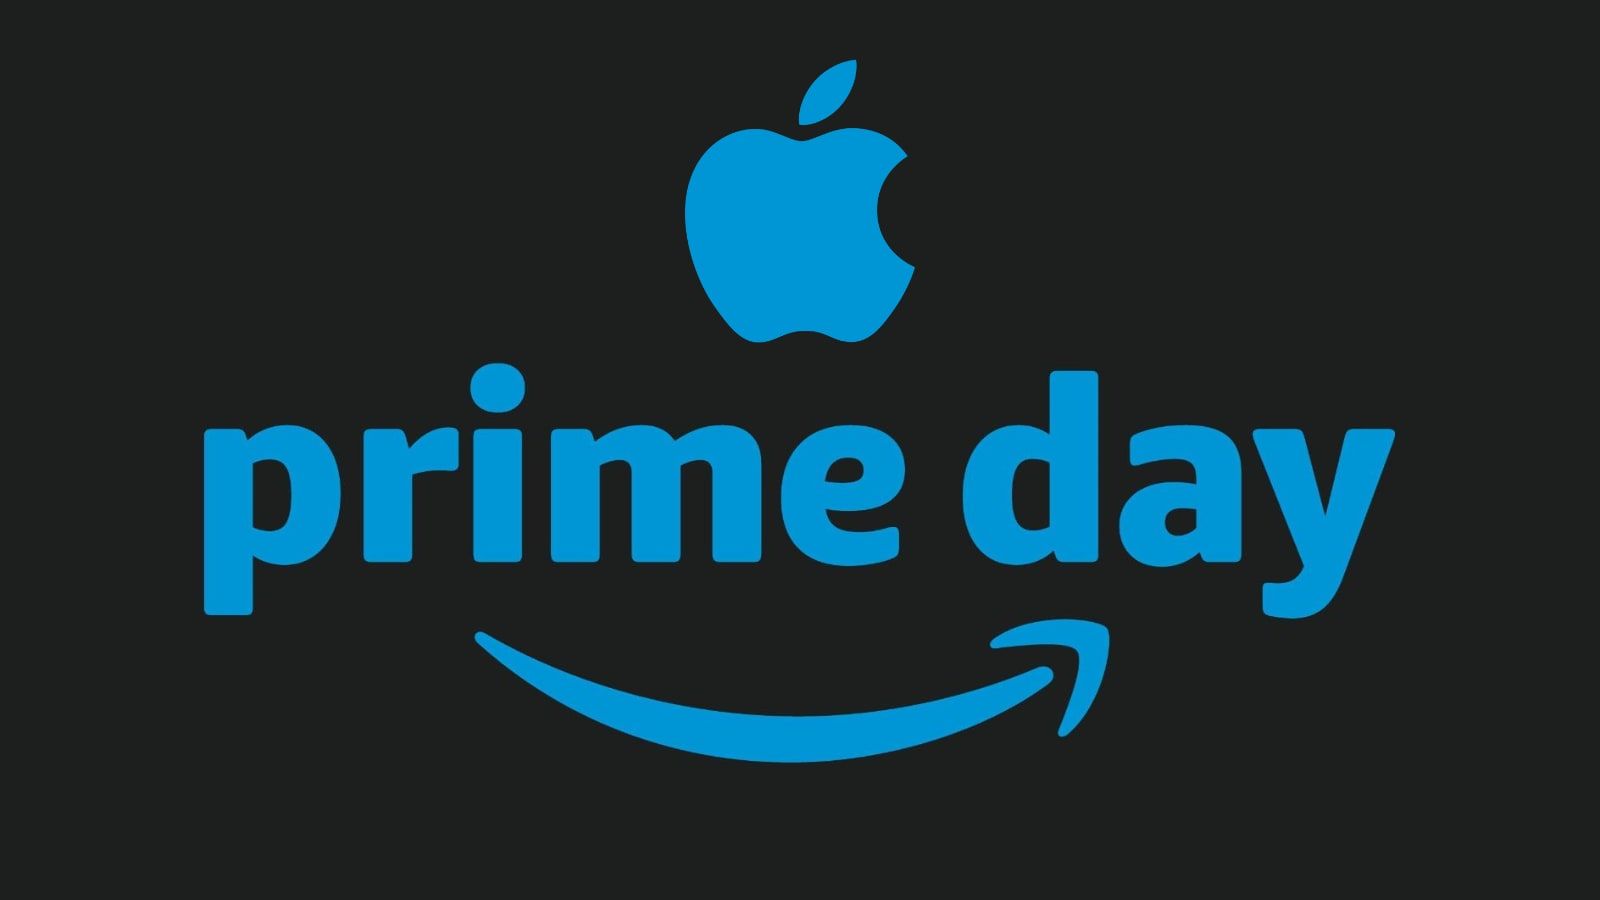 Amazon Prime Day 2022 "bis" all Apple promotions! Gearrice